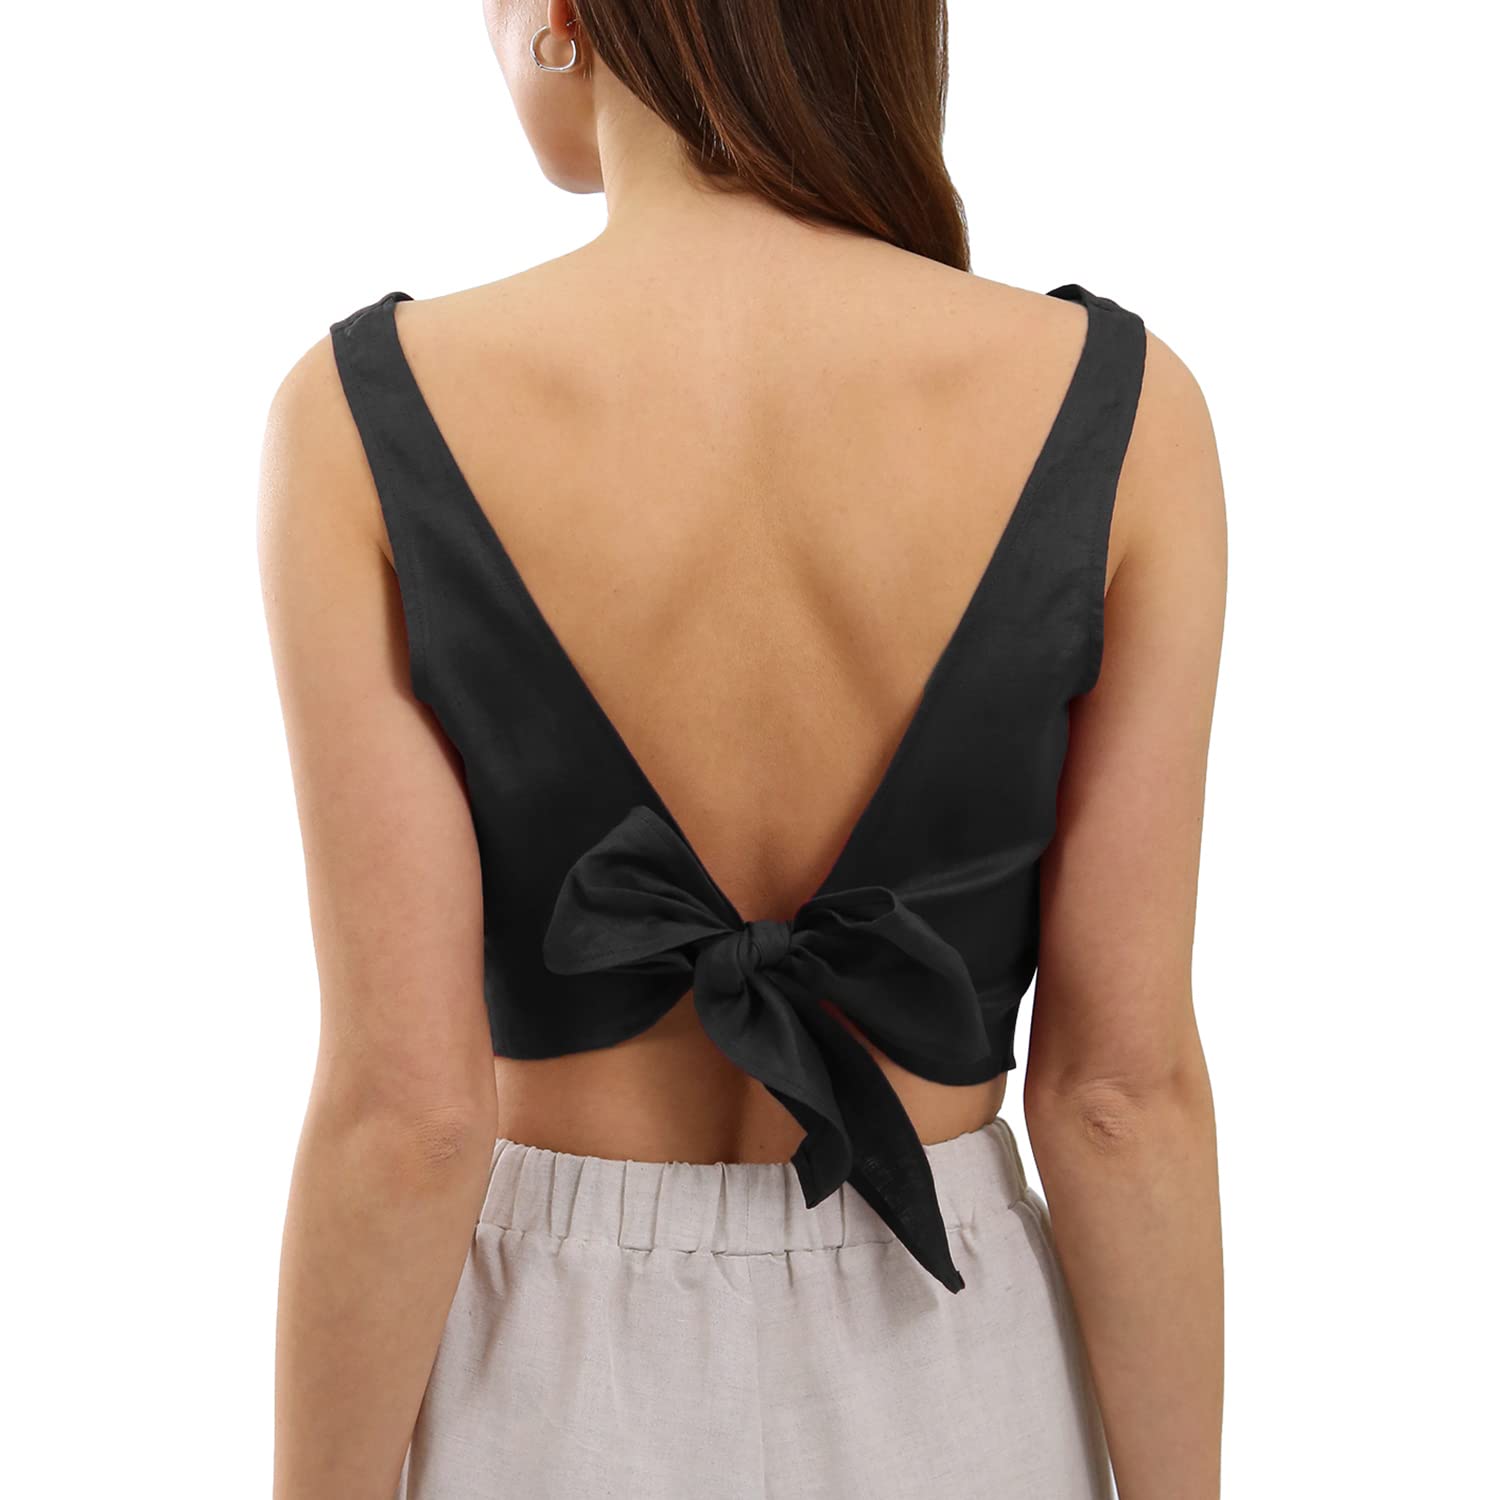 NTG Fad 100% Linen Crop Top with Open Back and Back Tie